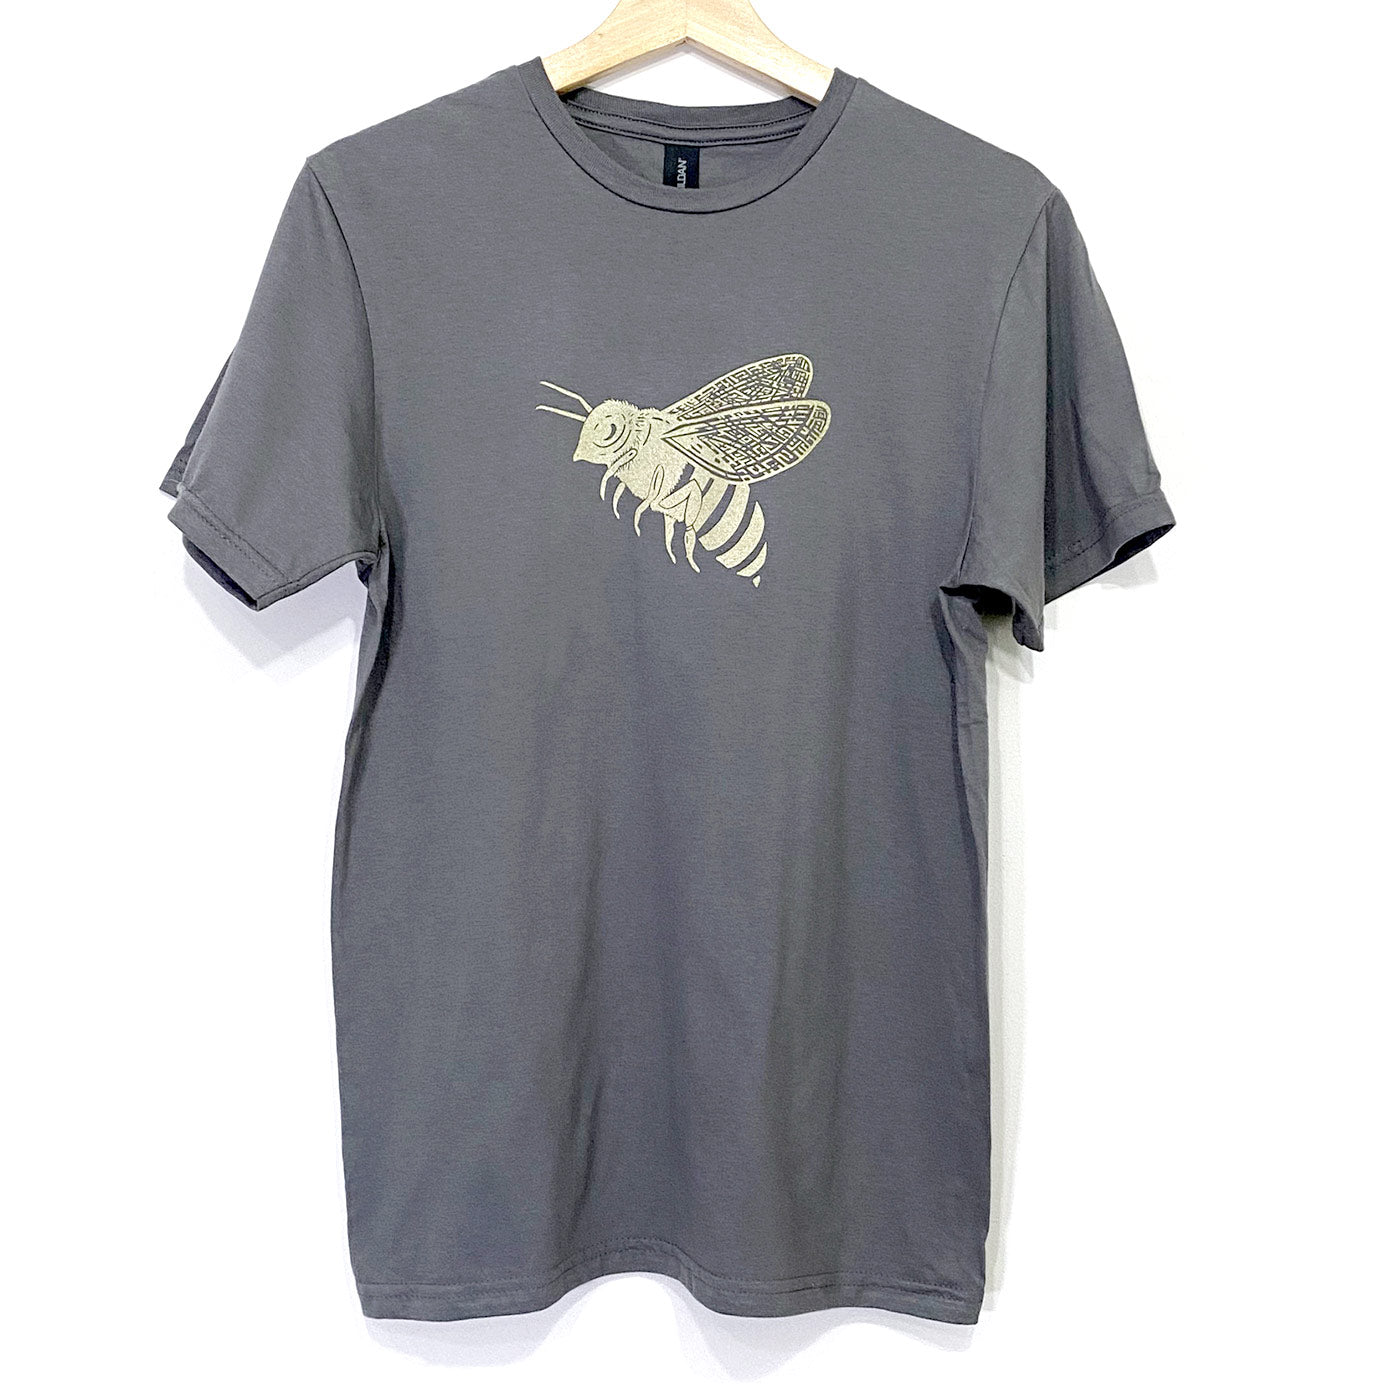 Gold Bee on Charcoal Grey T-shirt